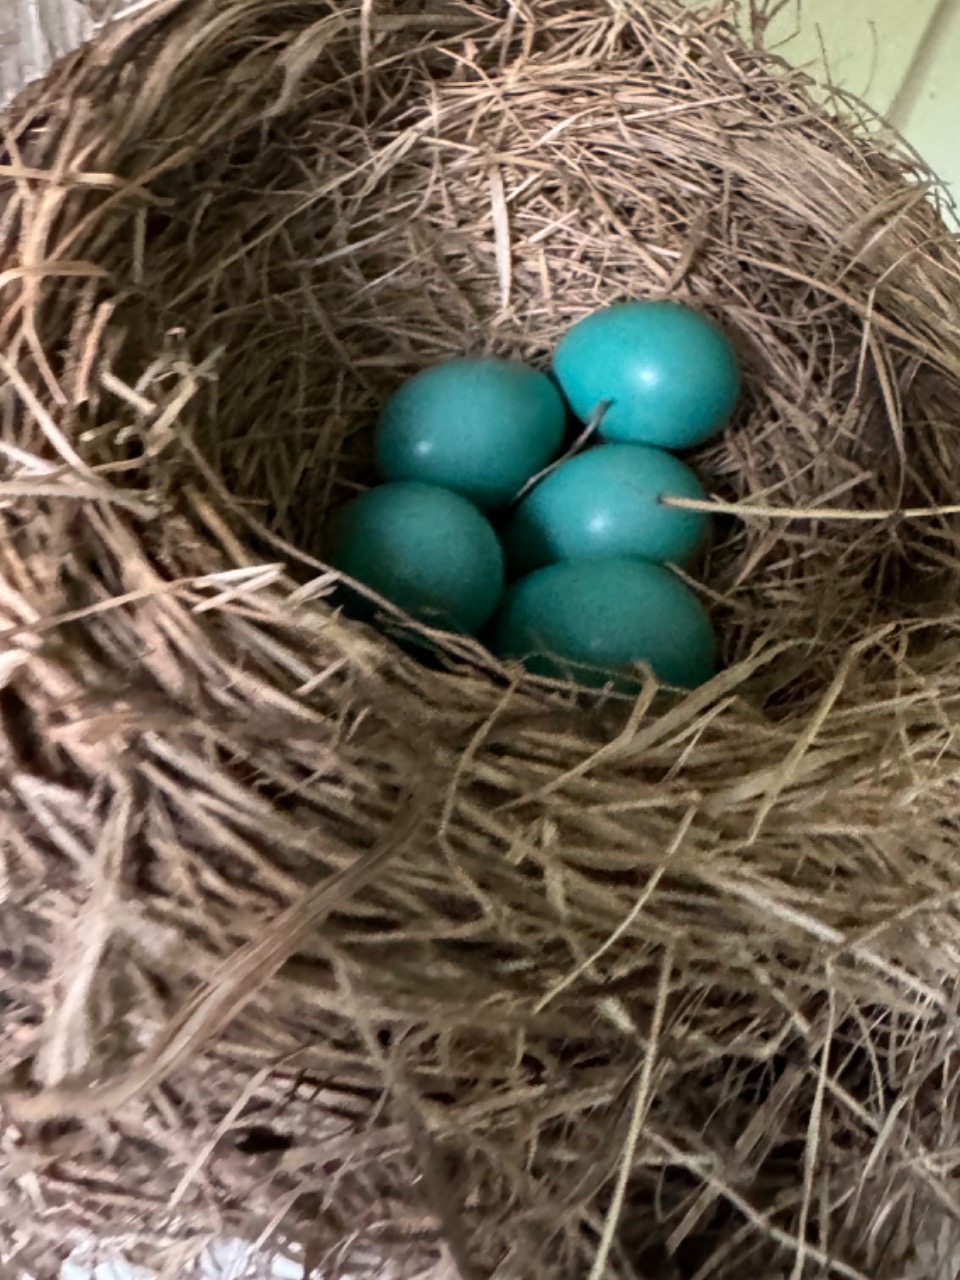 Five blue robin eggs in a brown nest, viewed from above